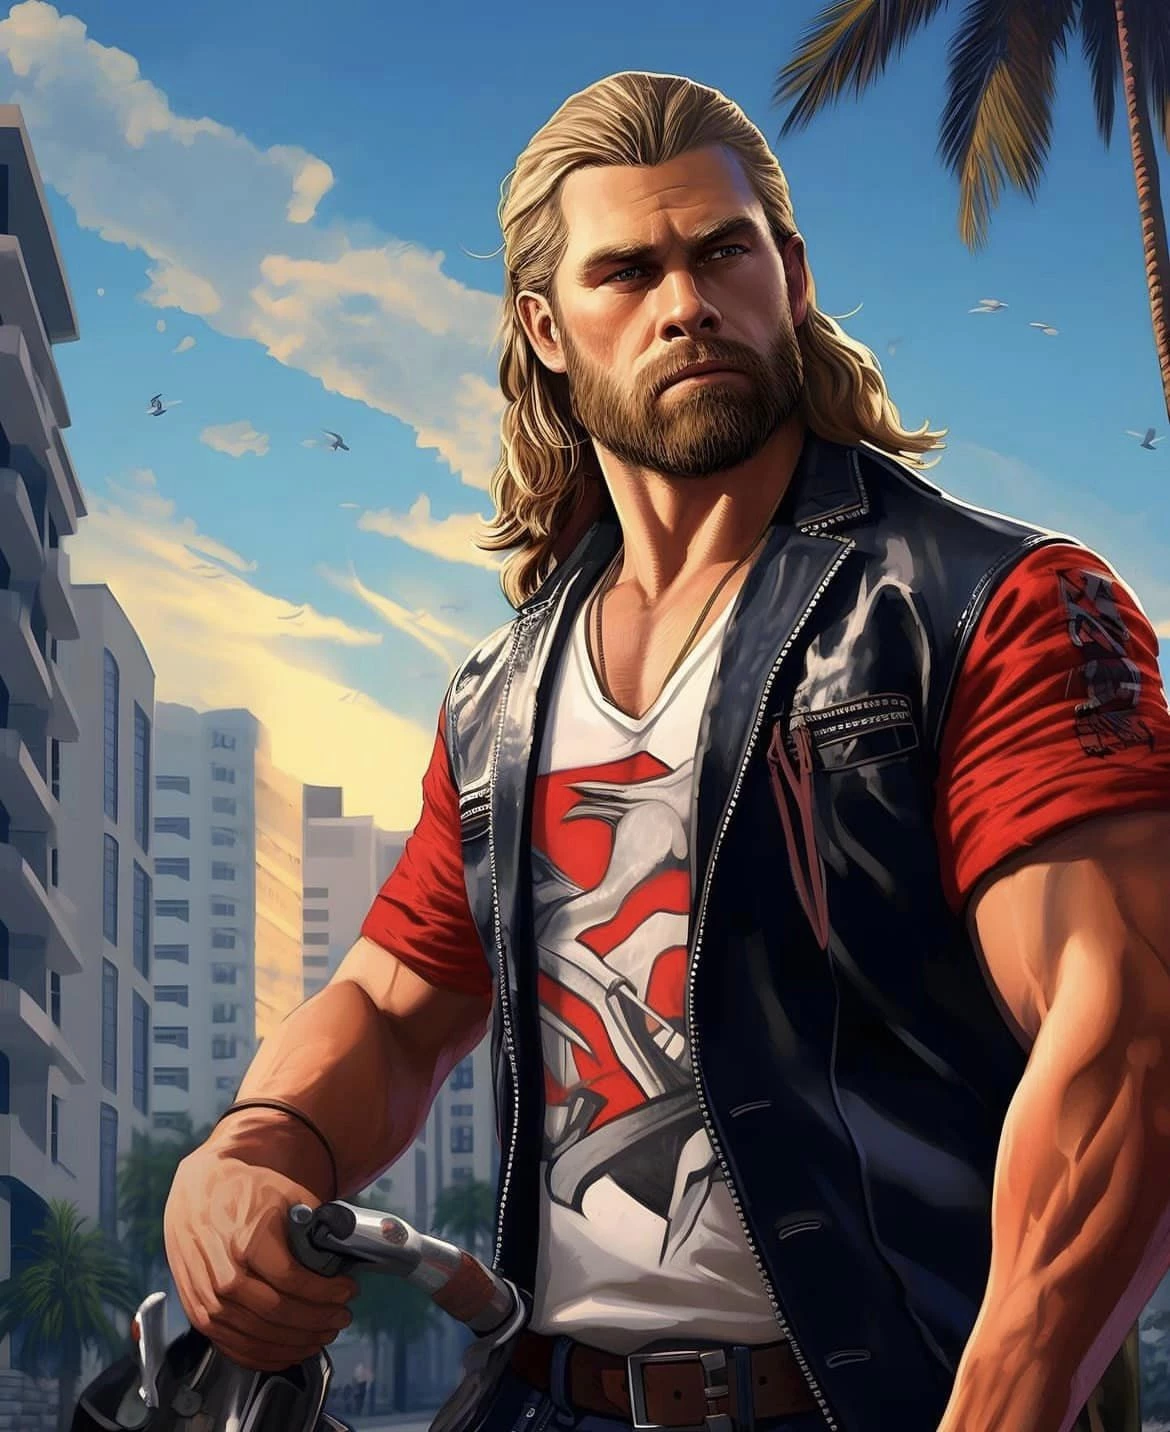 Thor Has Gone Full Florida Mode With This Biker Jacket